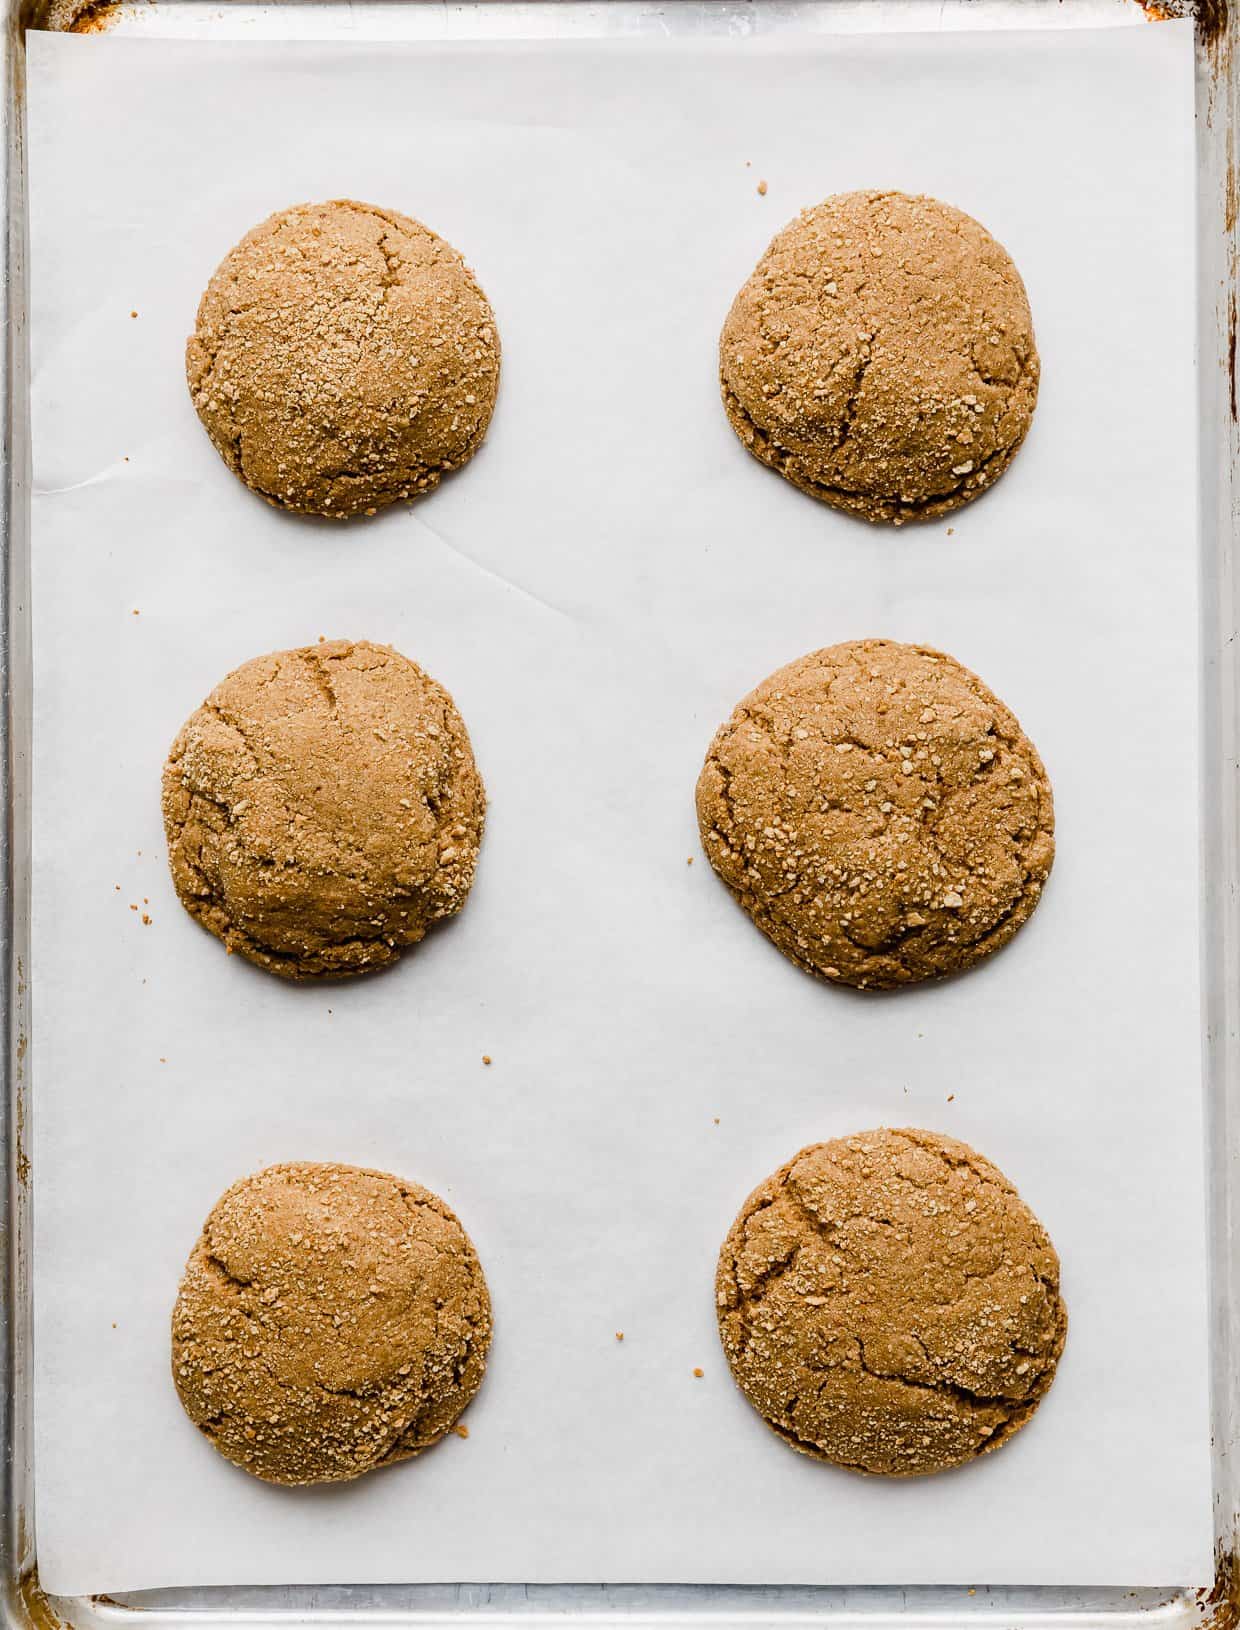 Six baked dark brown sugar graham cracker cookies on a white parchment lined baking sheet.